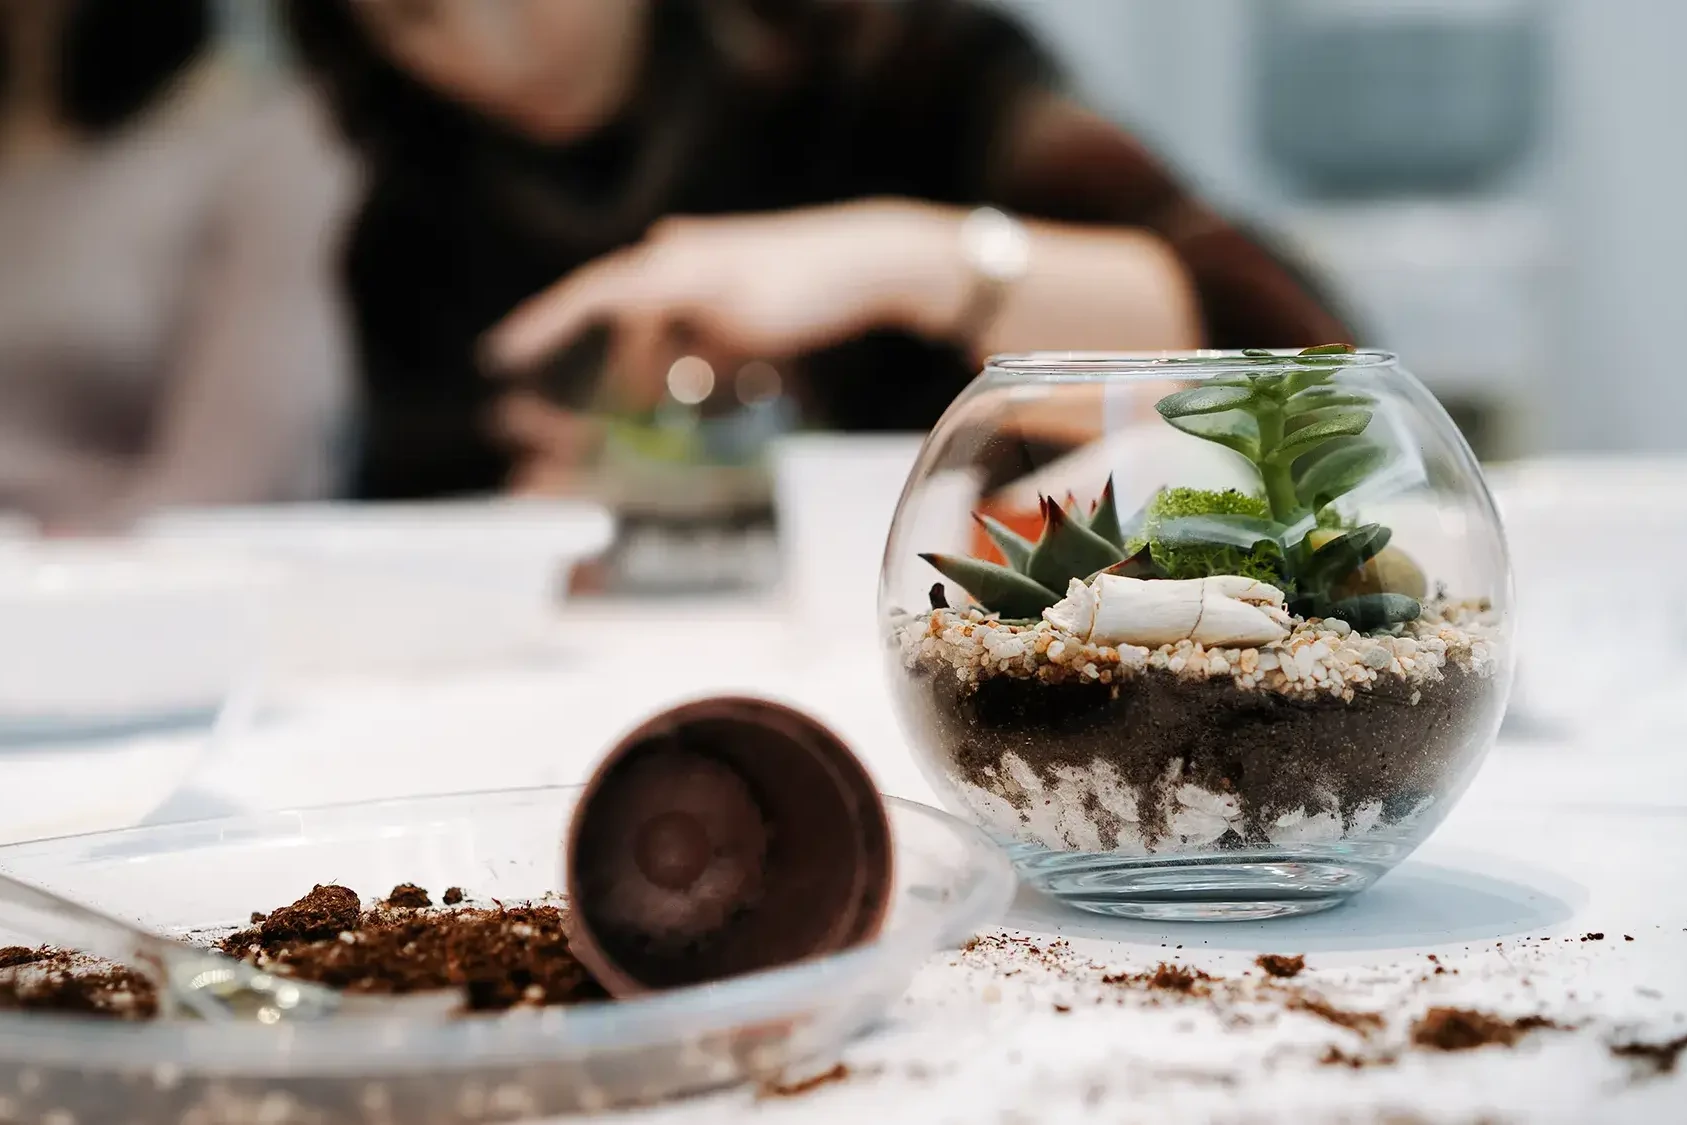 terrarium making class with employees